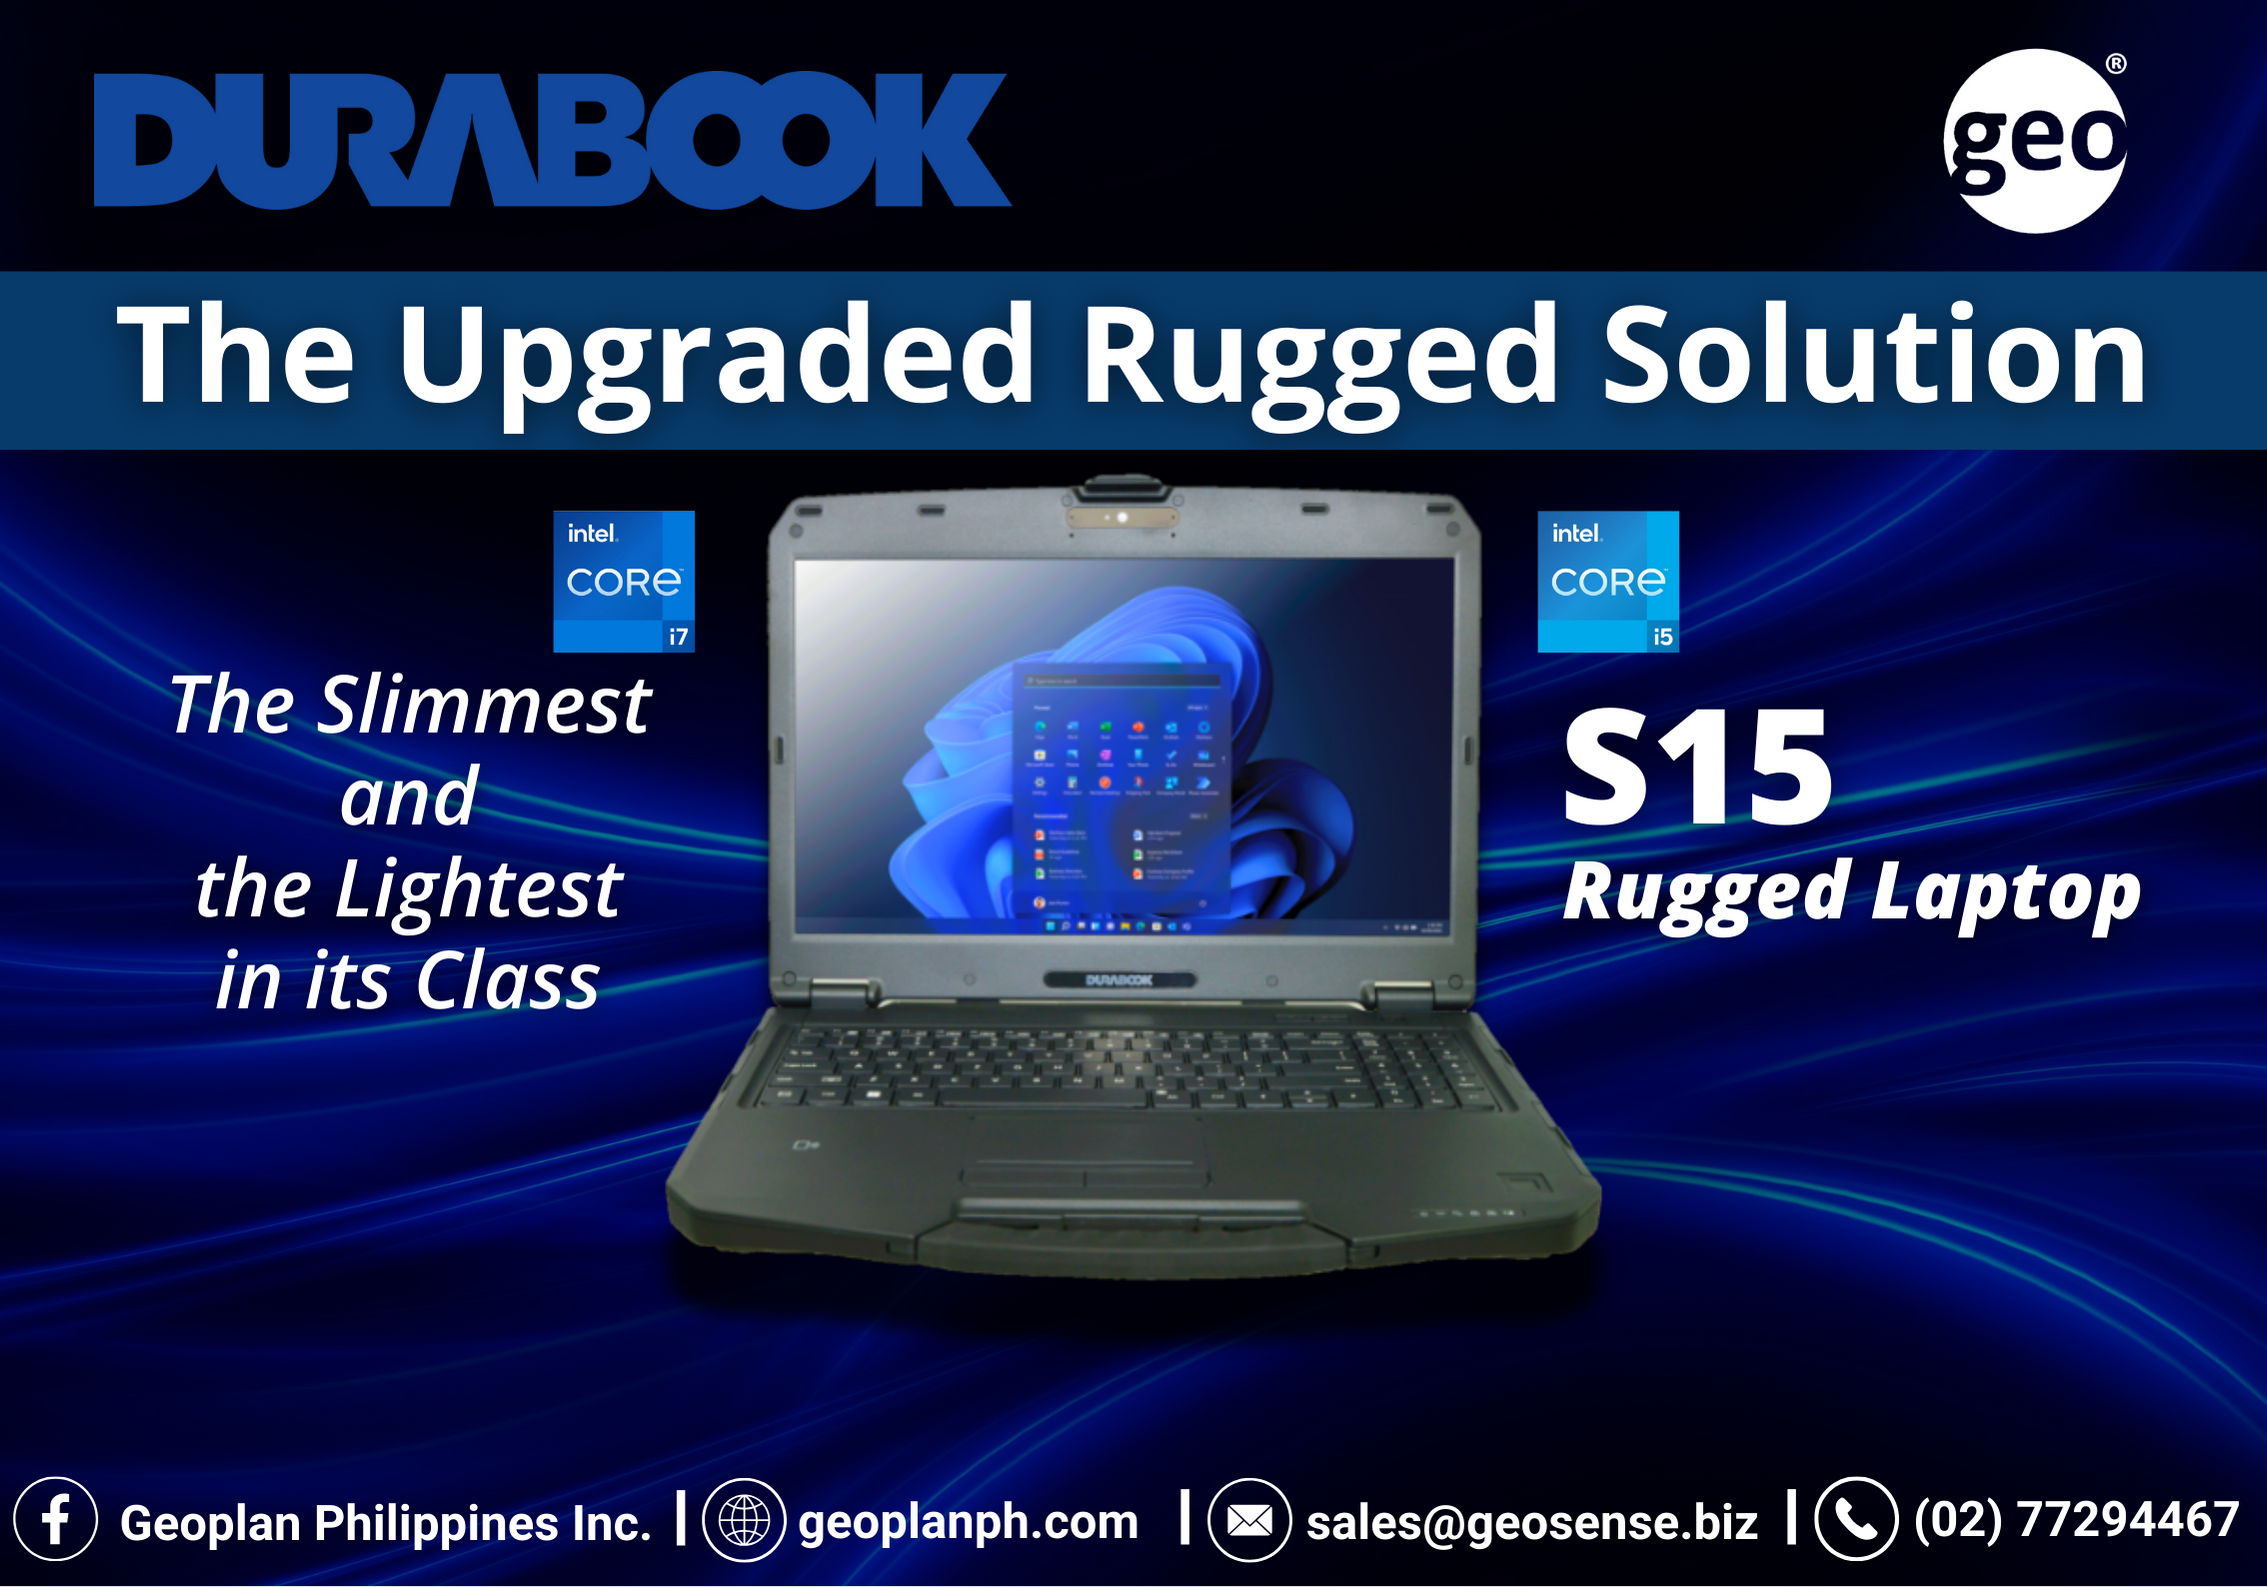 Durabook: The Upgraded Semi-Rugged Solution You Need to Know